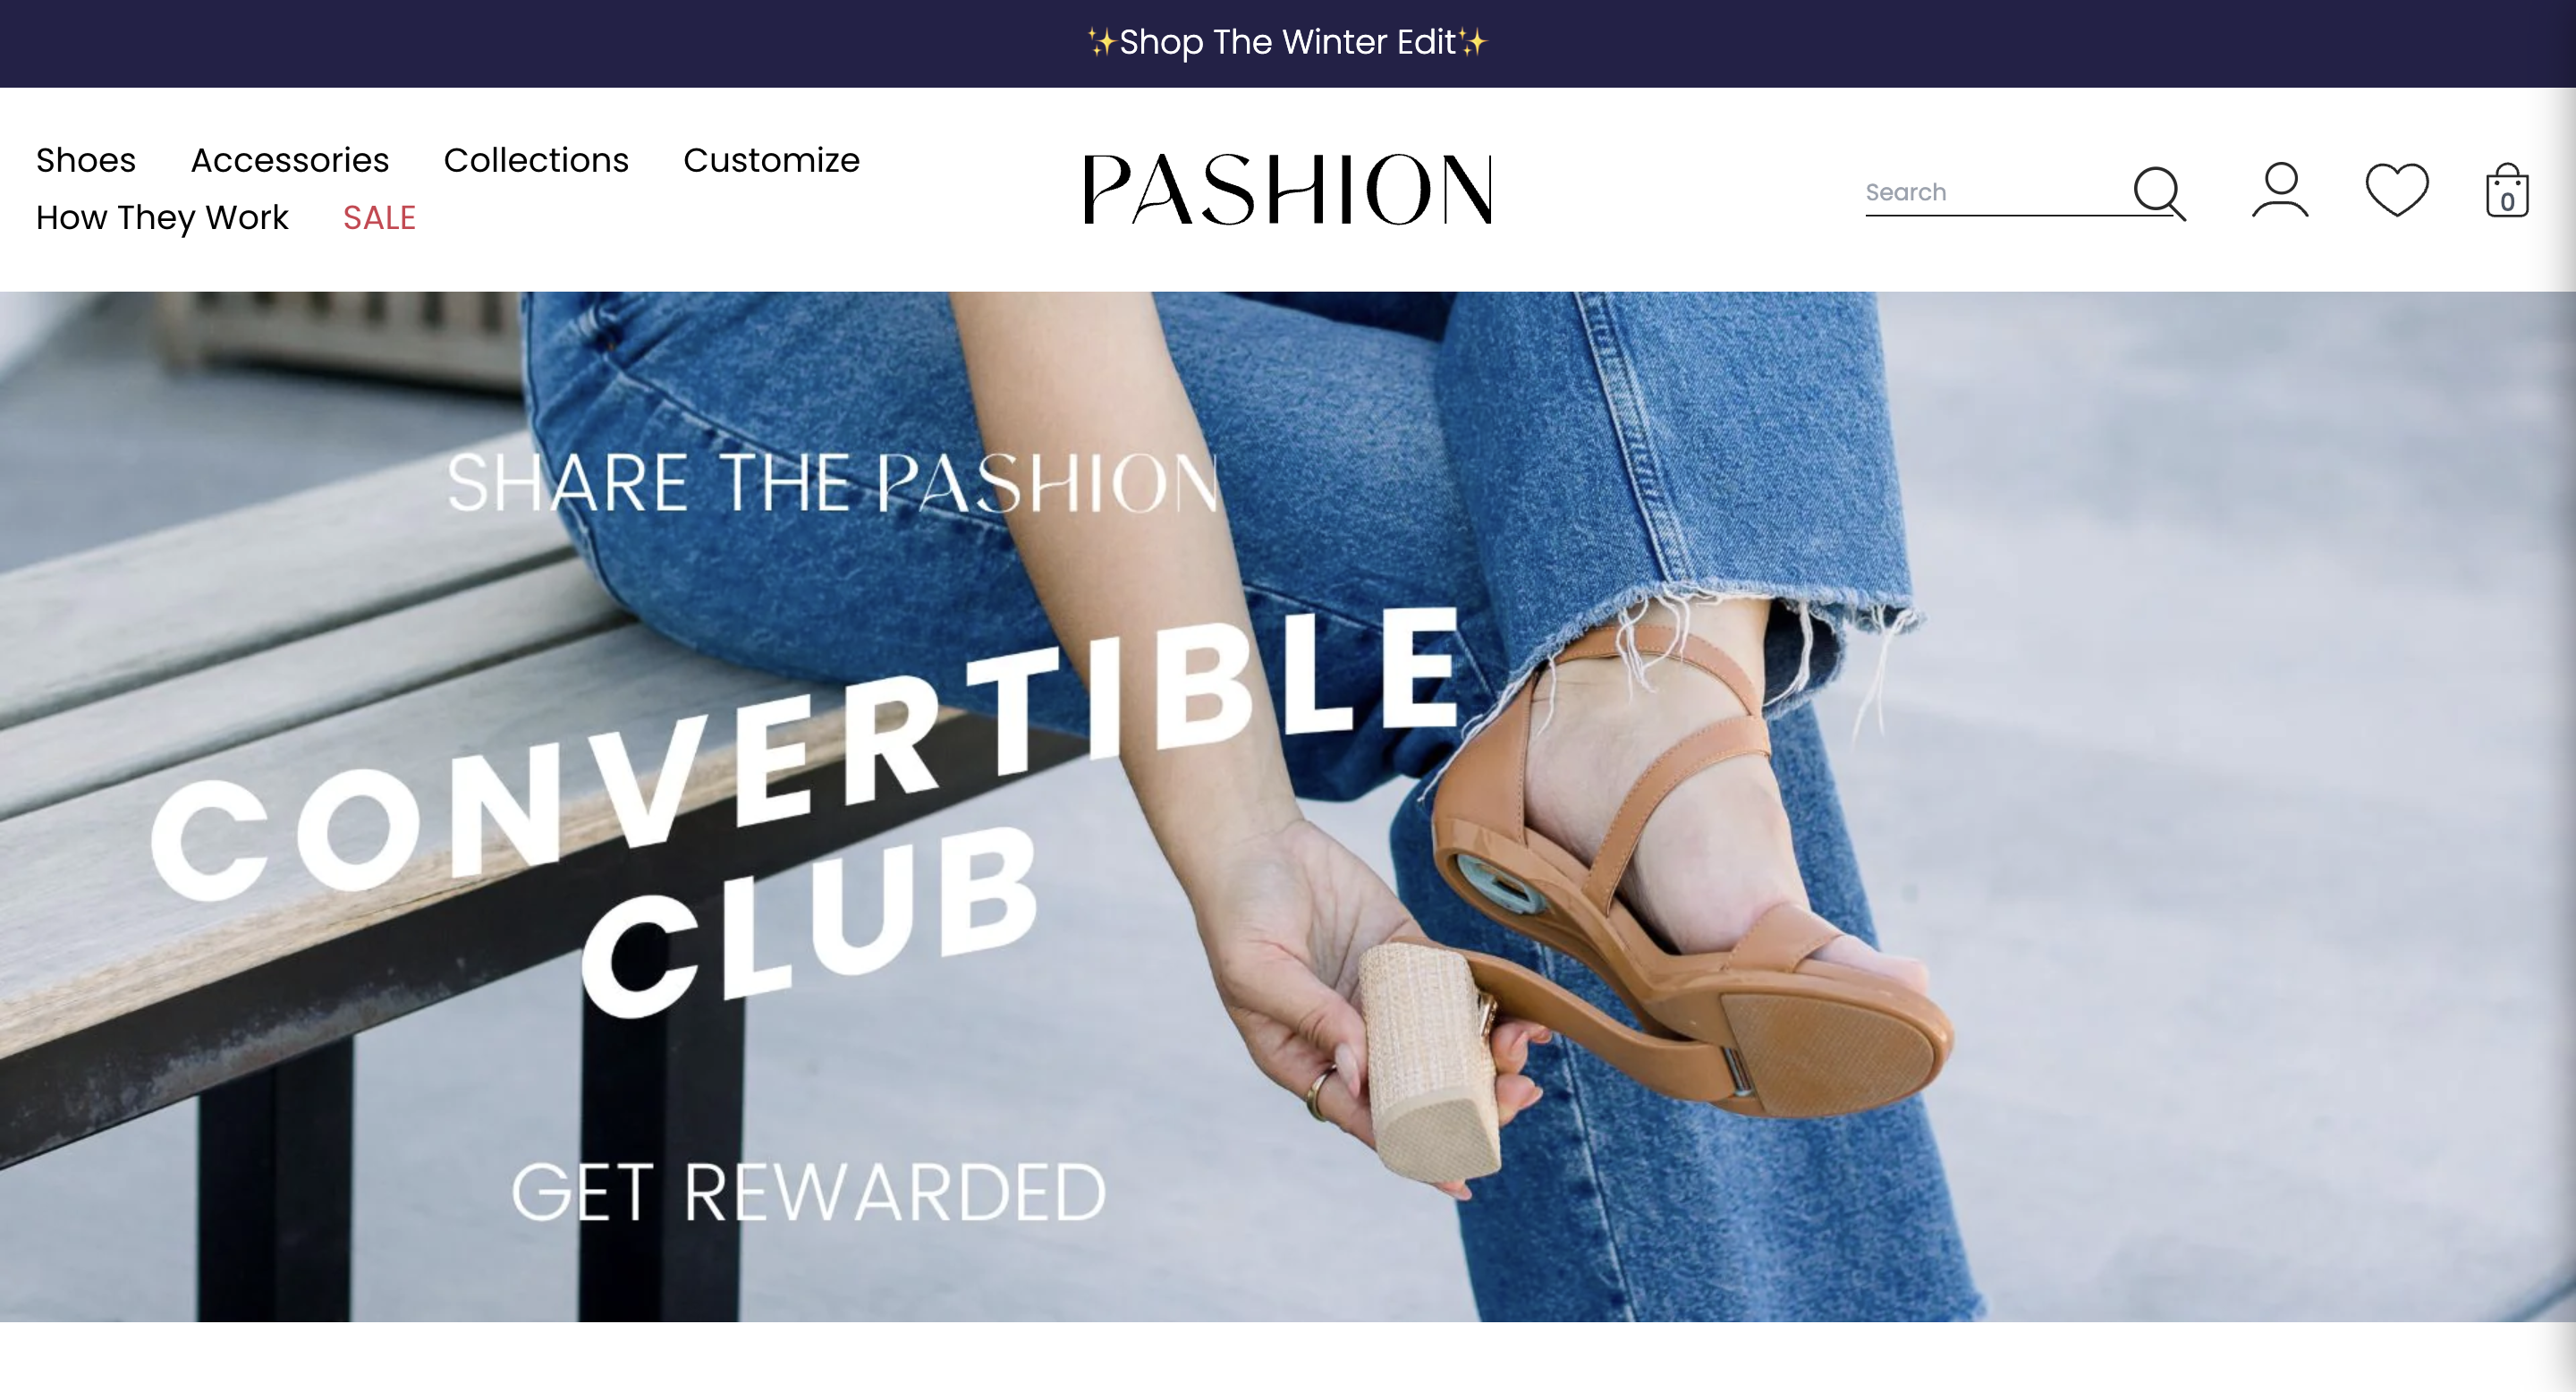 Pashion's Creator / Influencer Program called the Convertible Club